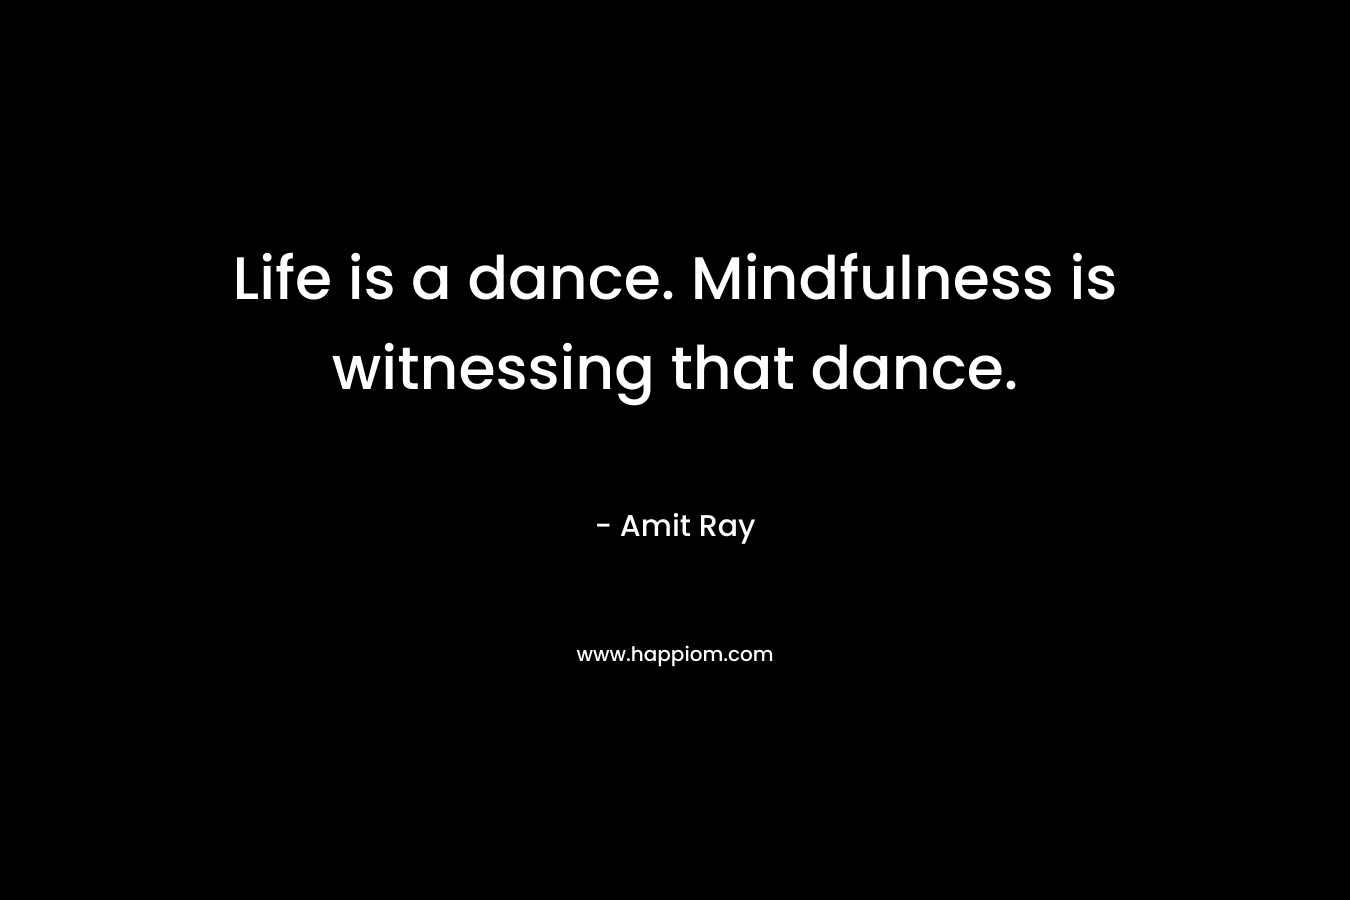 Life is a dance. Mindfulness is witnessing that dance. – Amit Ray